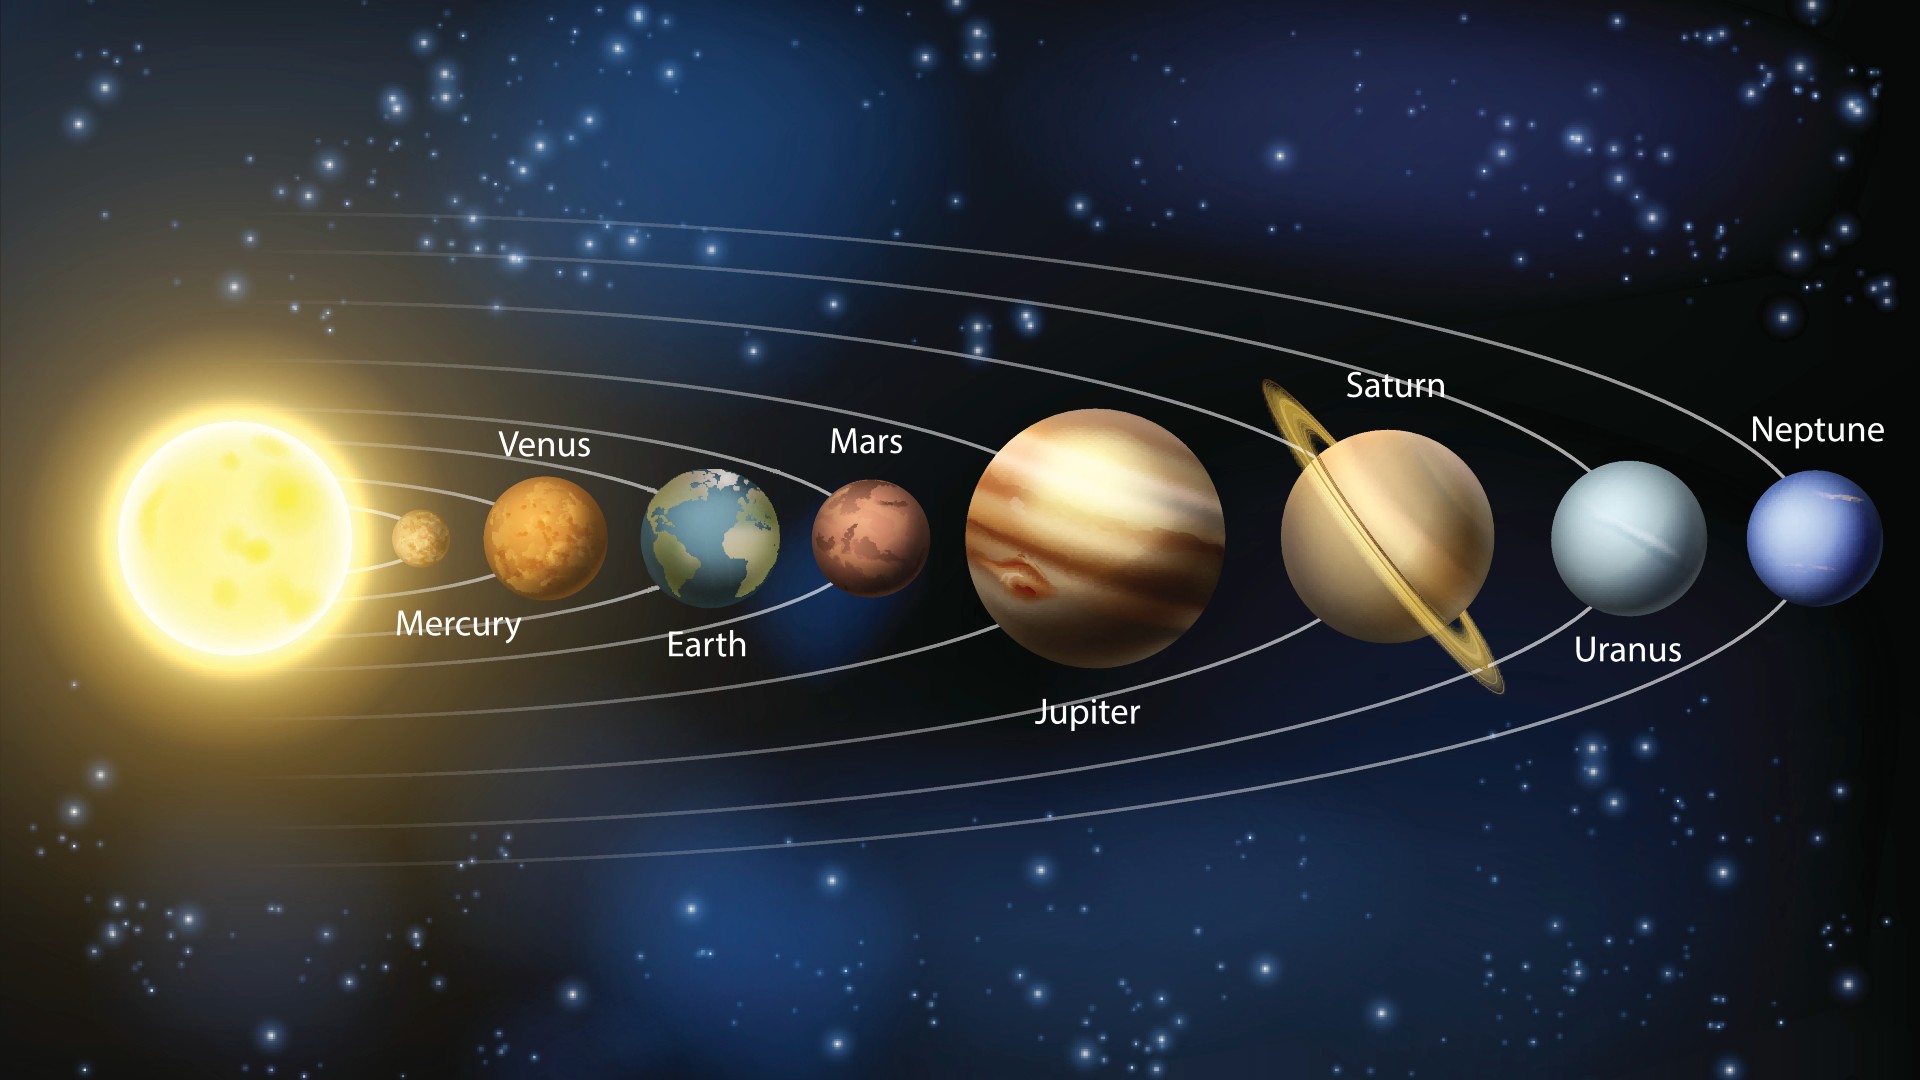 A diagram of the planets in our solar system with the names of the planets.  From left to right: the Sun (light yellow), Mercury (smallest, brown), Venus (slightly larger, reddish brown), Earth (slightly larger, blue and green), Mars (slightly smaller, red), Jupiter (largest), brown and beige), Saturn (slightly smaller, beige with a yellow ring around it), Uranus (smaller, but larger than earth gray) and Neptune (slightly smaller, blue).  There are also white rings to show the orbit of each planet.